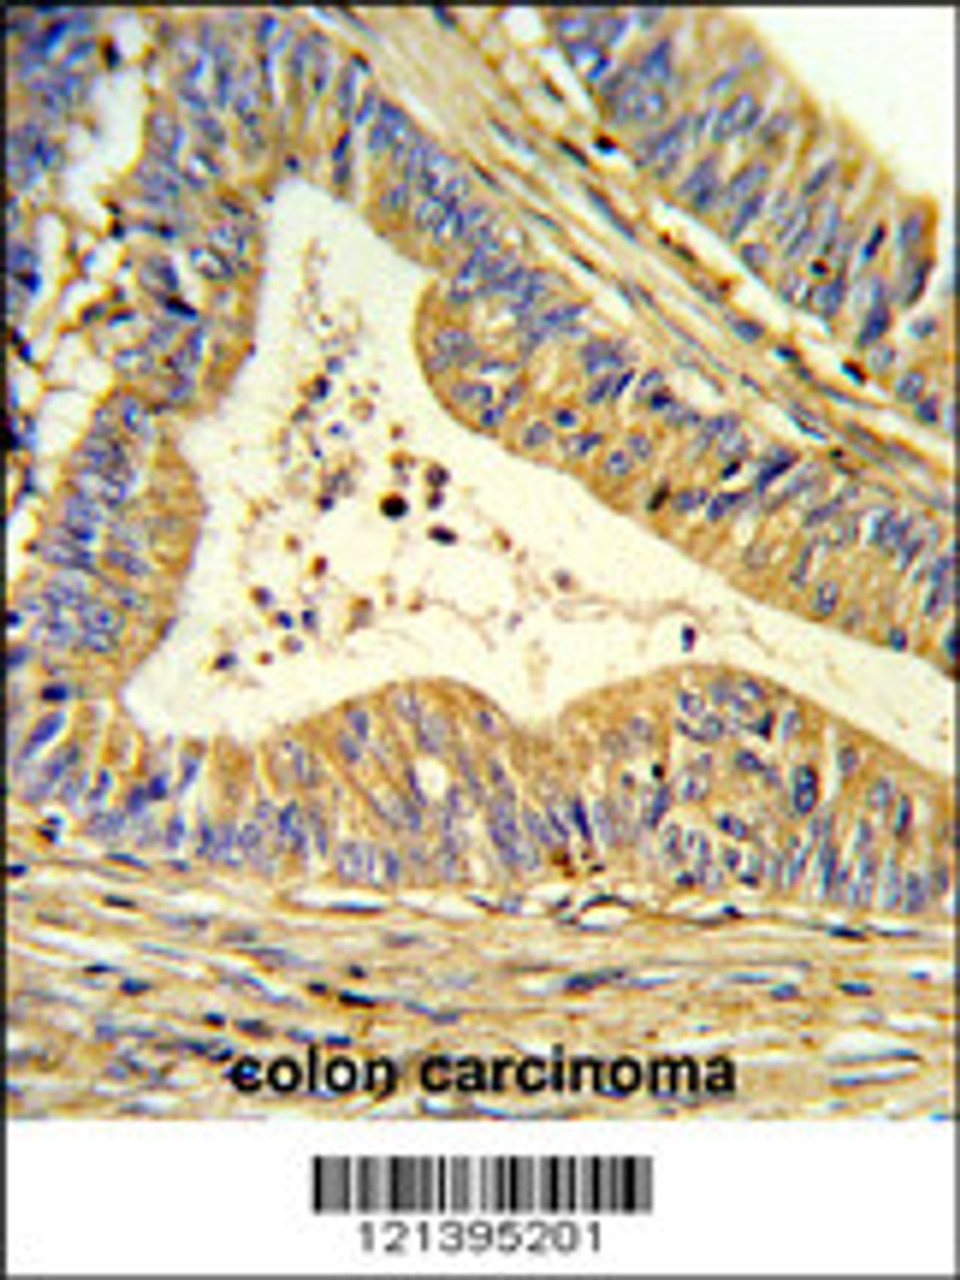 Formalin-fixed and paraffin-embedded human colon carcinoma reacted with SOD1 Antibody, which was peroxidase-conjugated to the secondary antibody, followed by DAB staining.